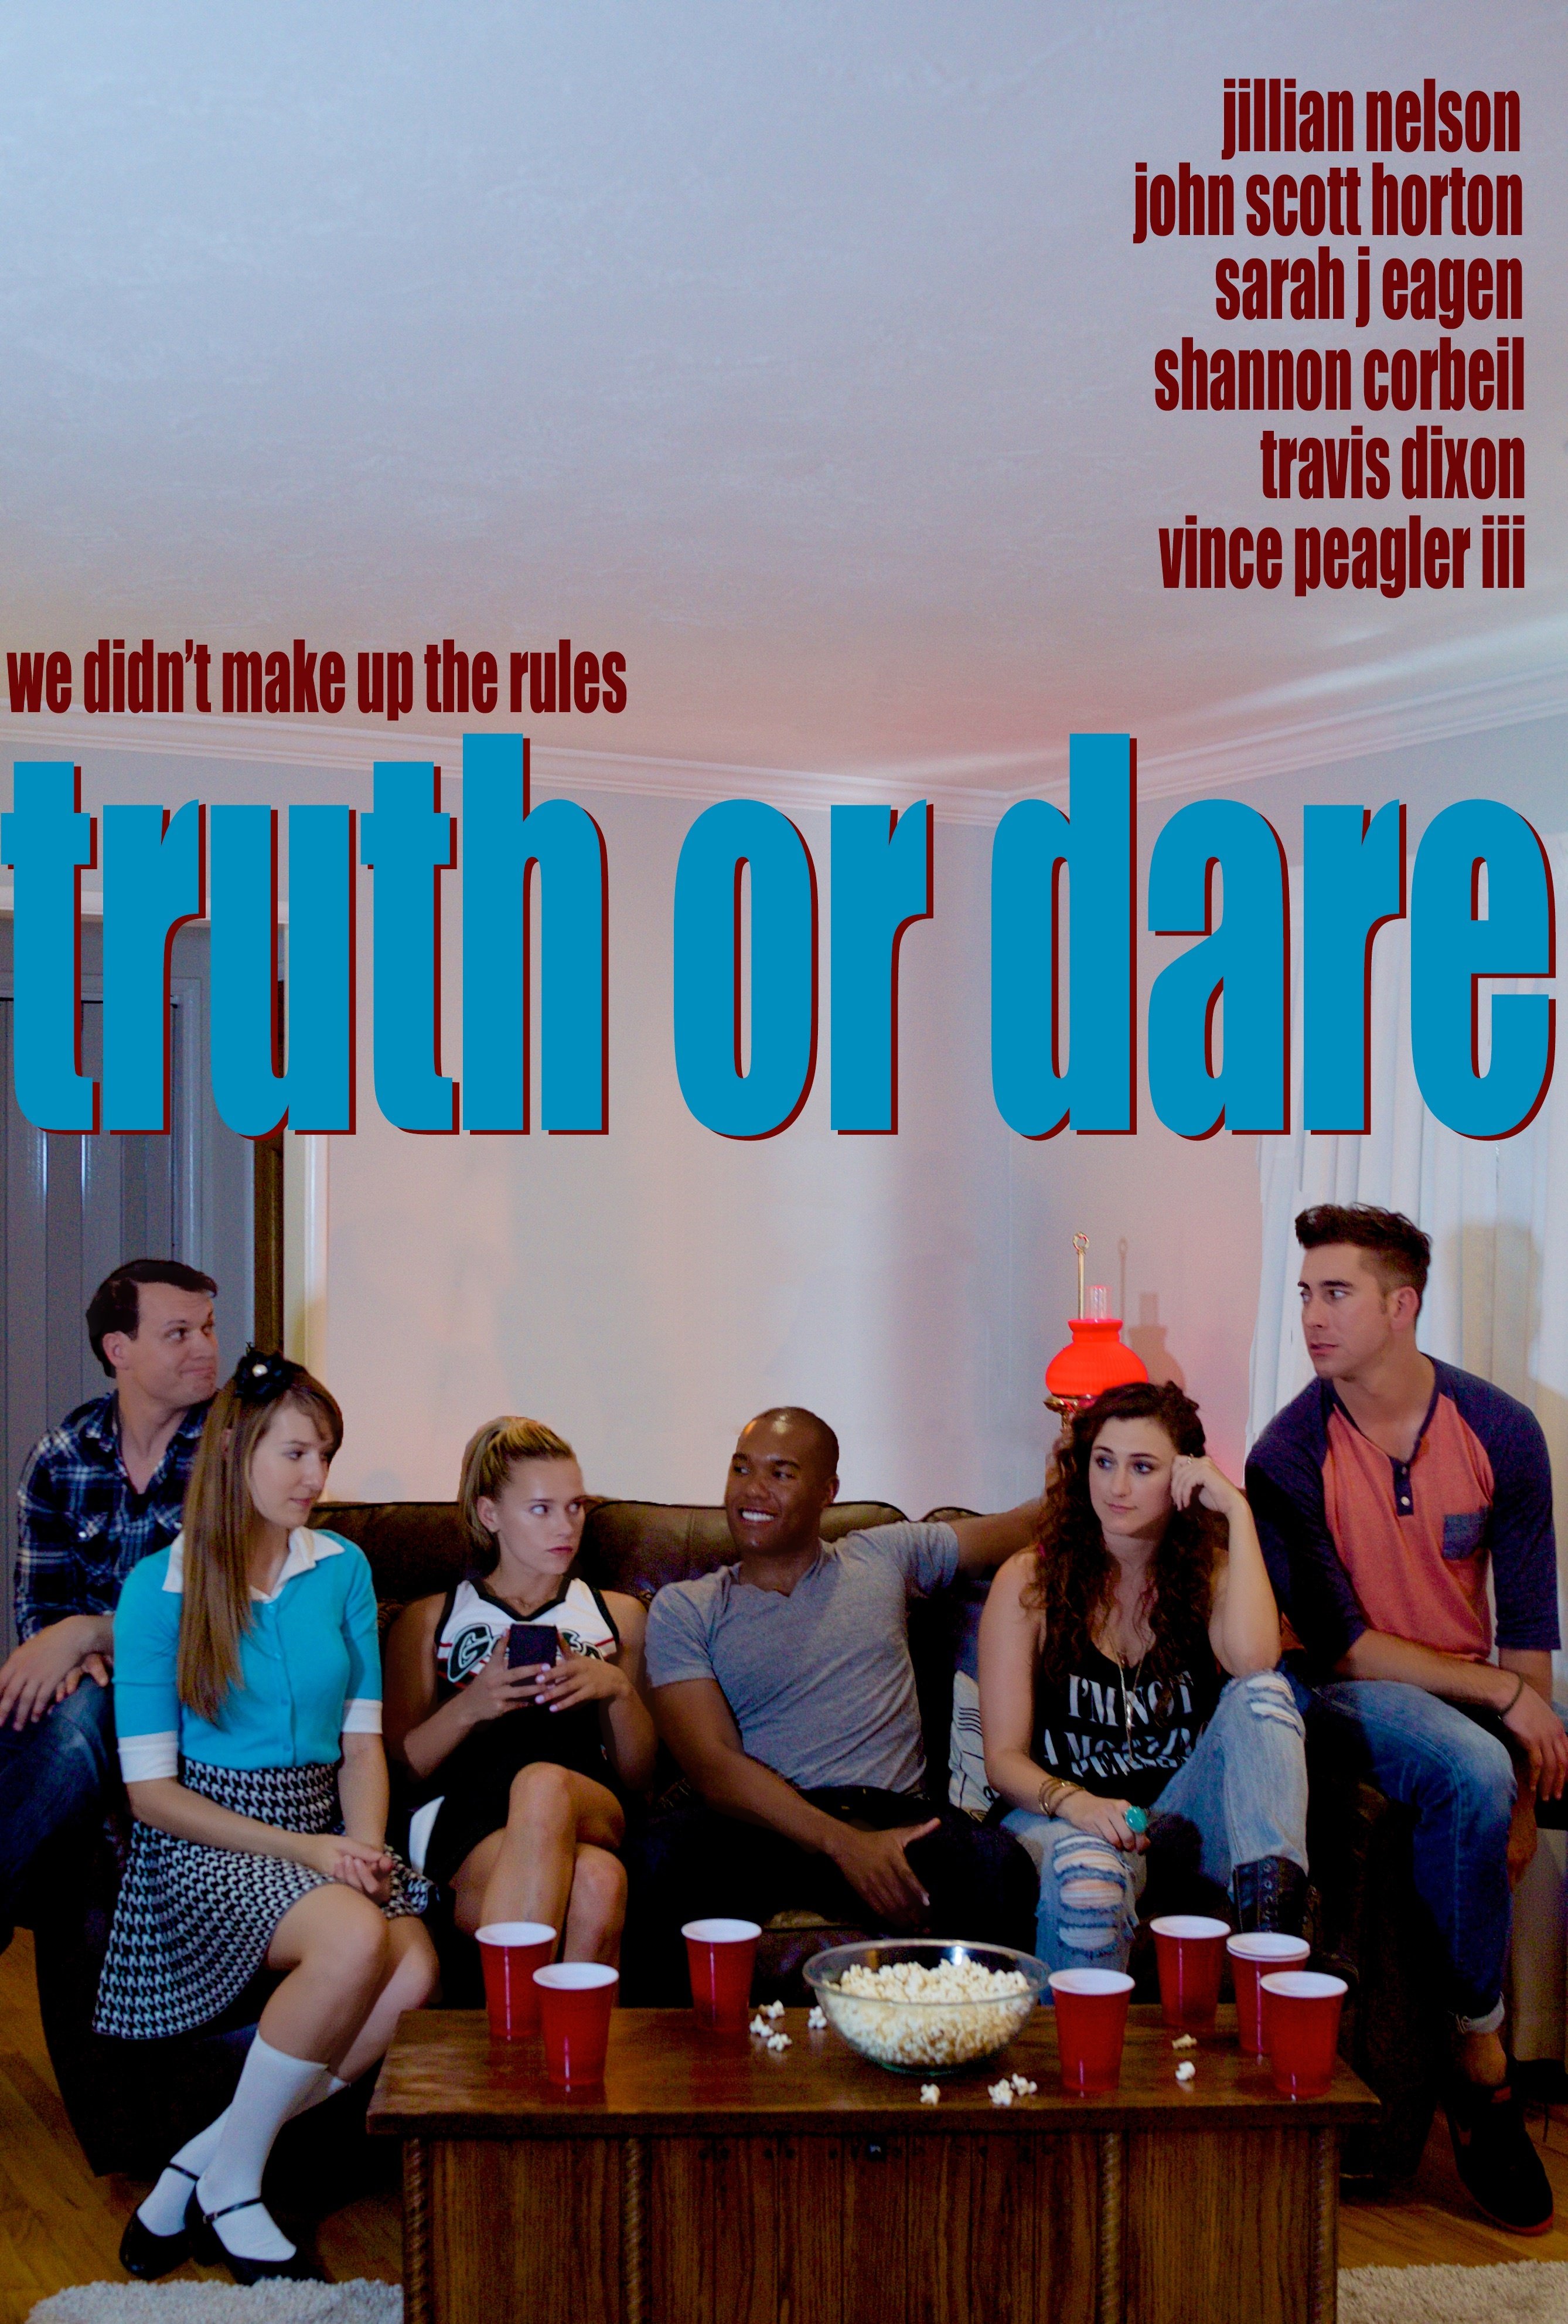 brian wormley recommends truth or darepics pic